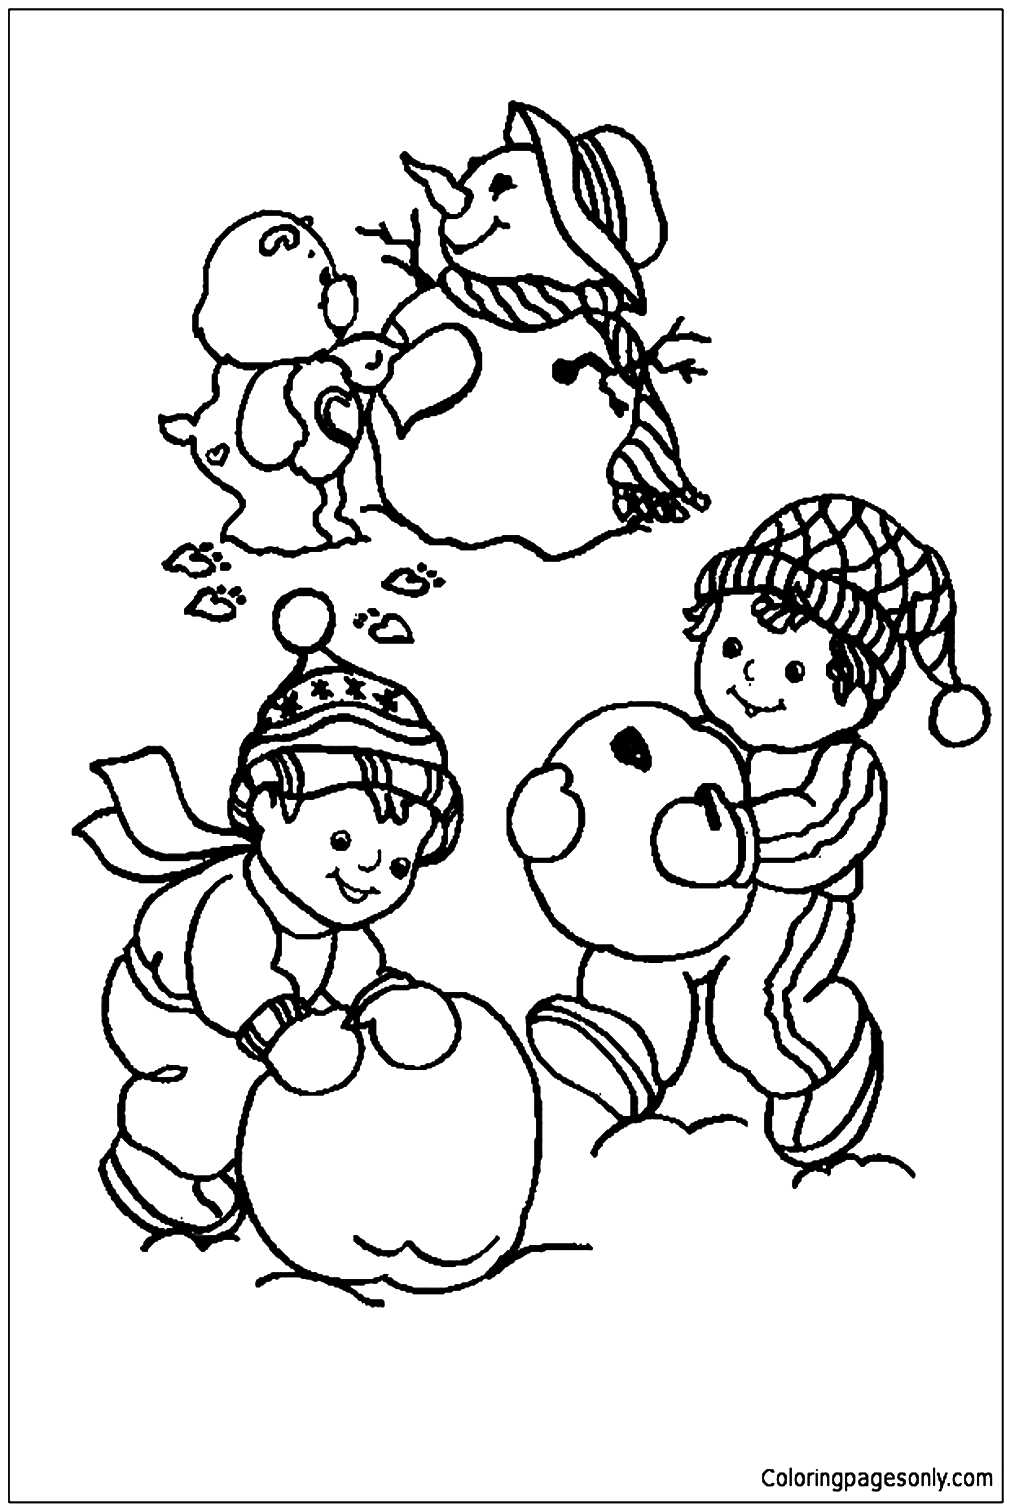 Care Bear And Snowman Coloring Page